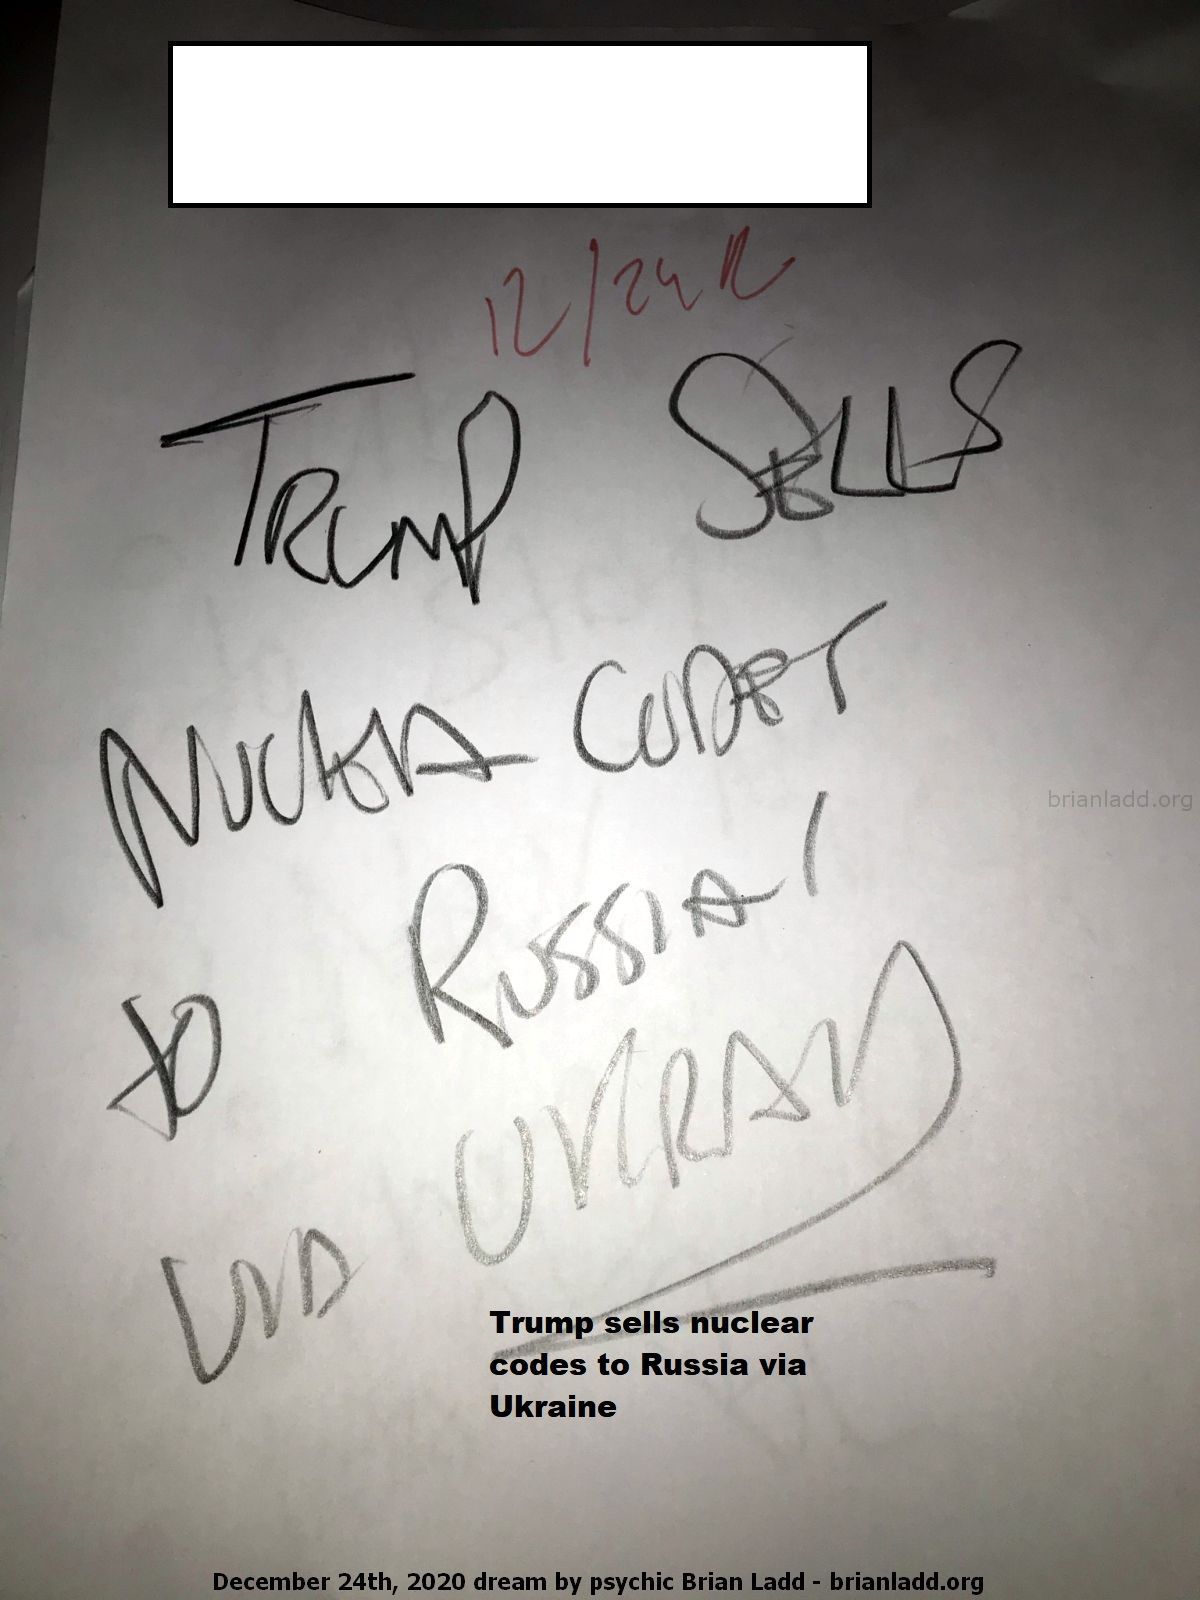 14214 24 December 2020 3 - Trump Sells Nuclear Codes To Russia Via Ukraine....
Trump Sells Nuclear Codes To Russia Via Ukraine.
